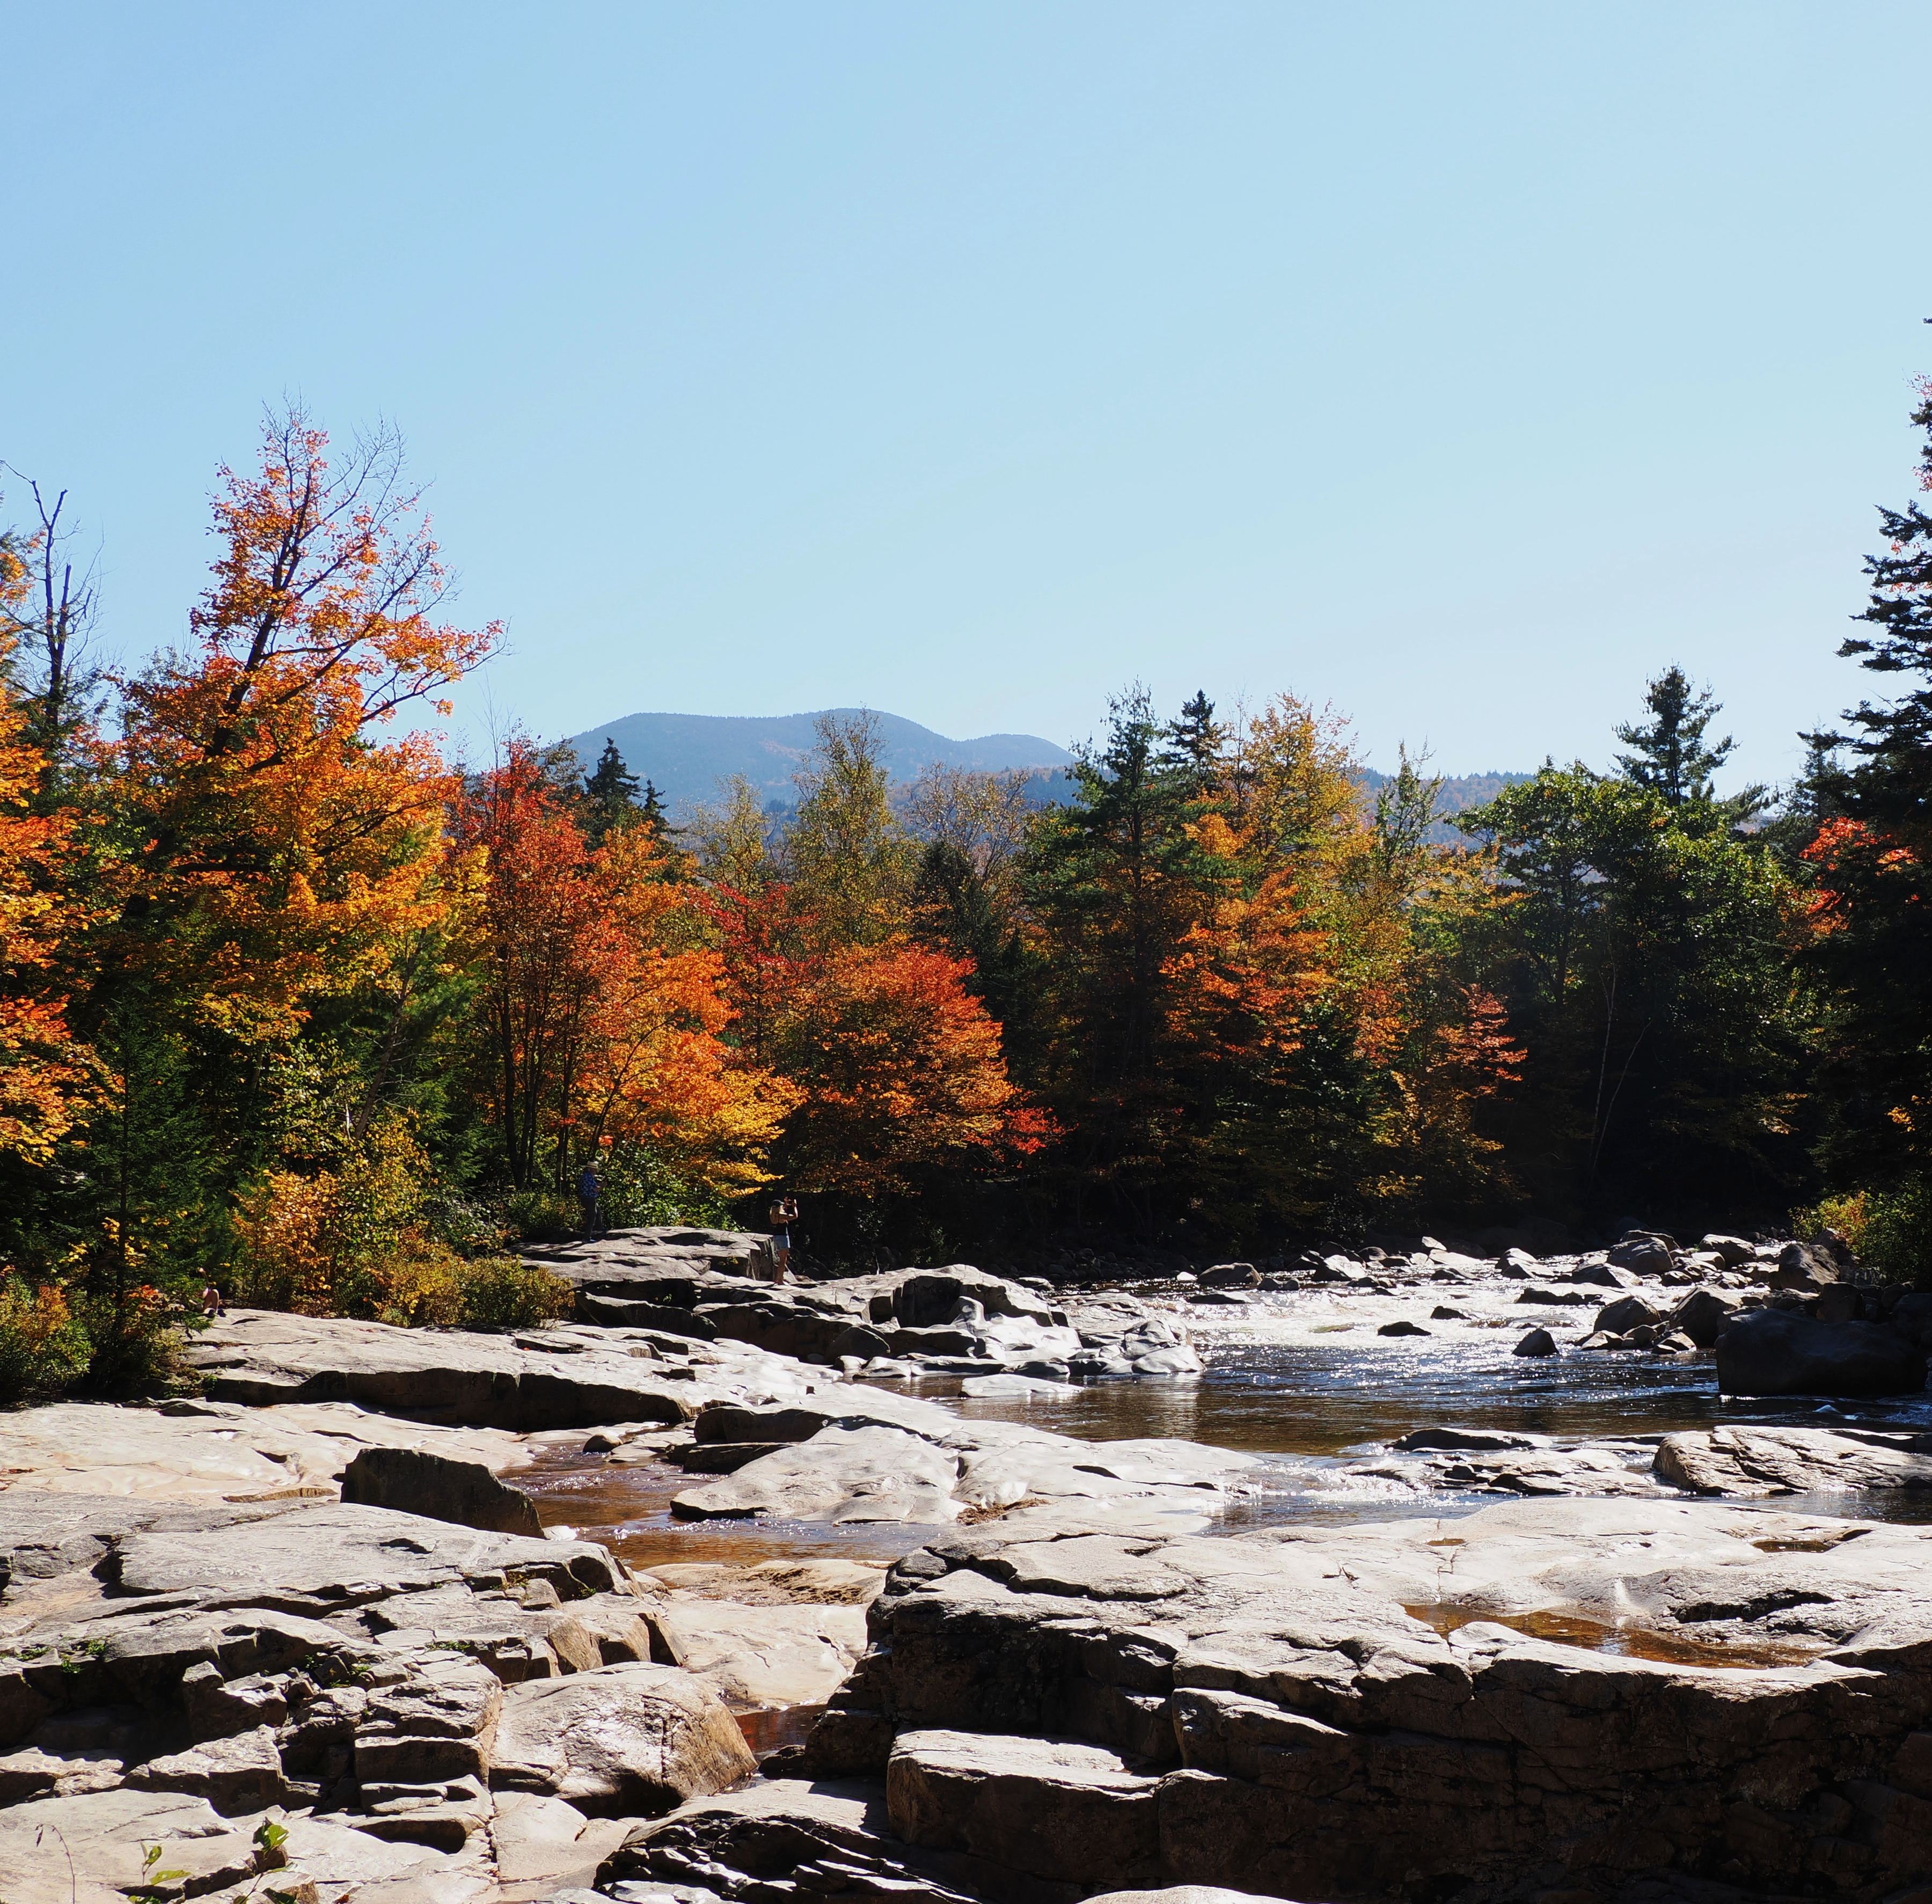 Lower Falls scenic area on the Kancamagus highway